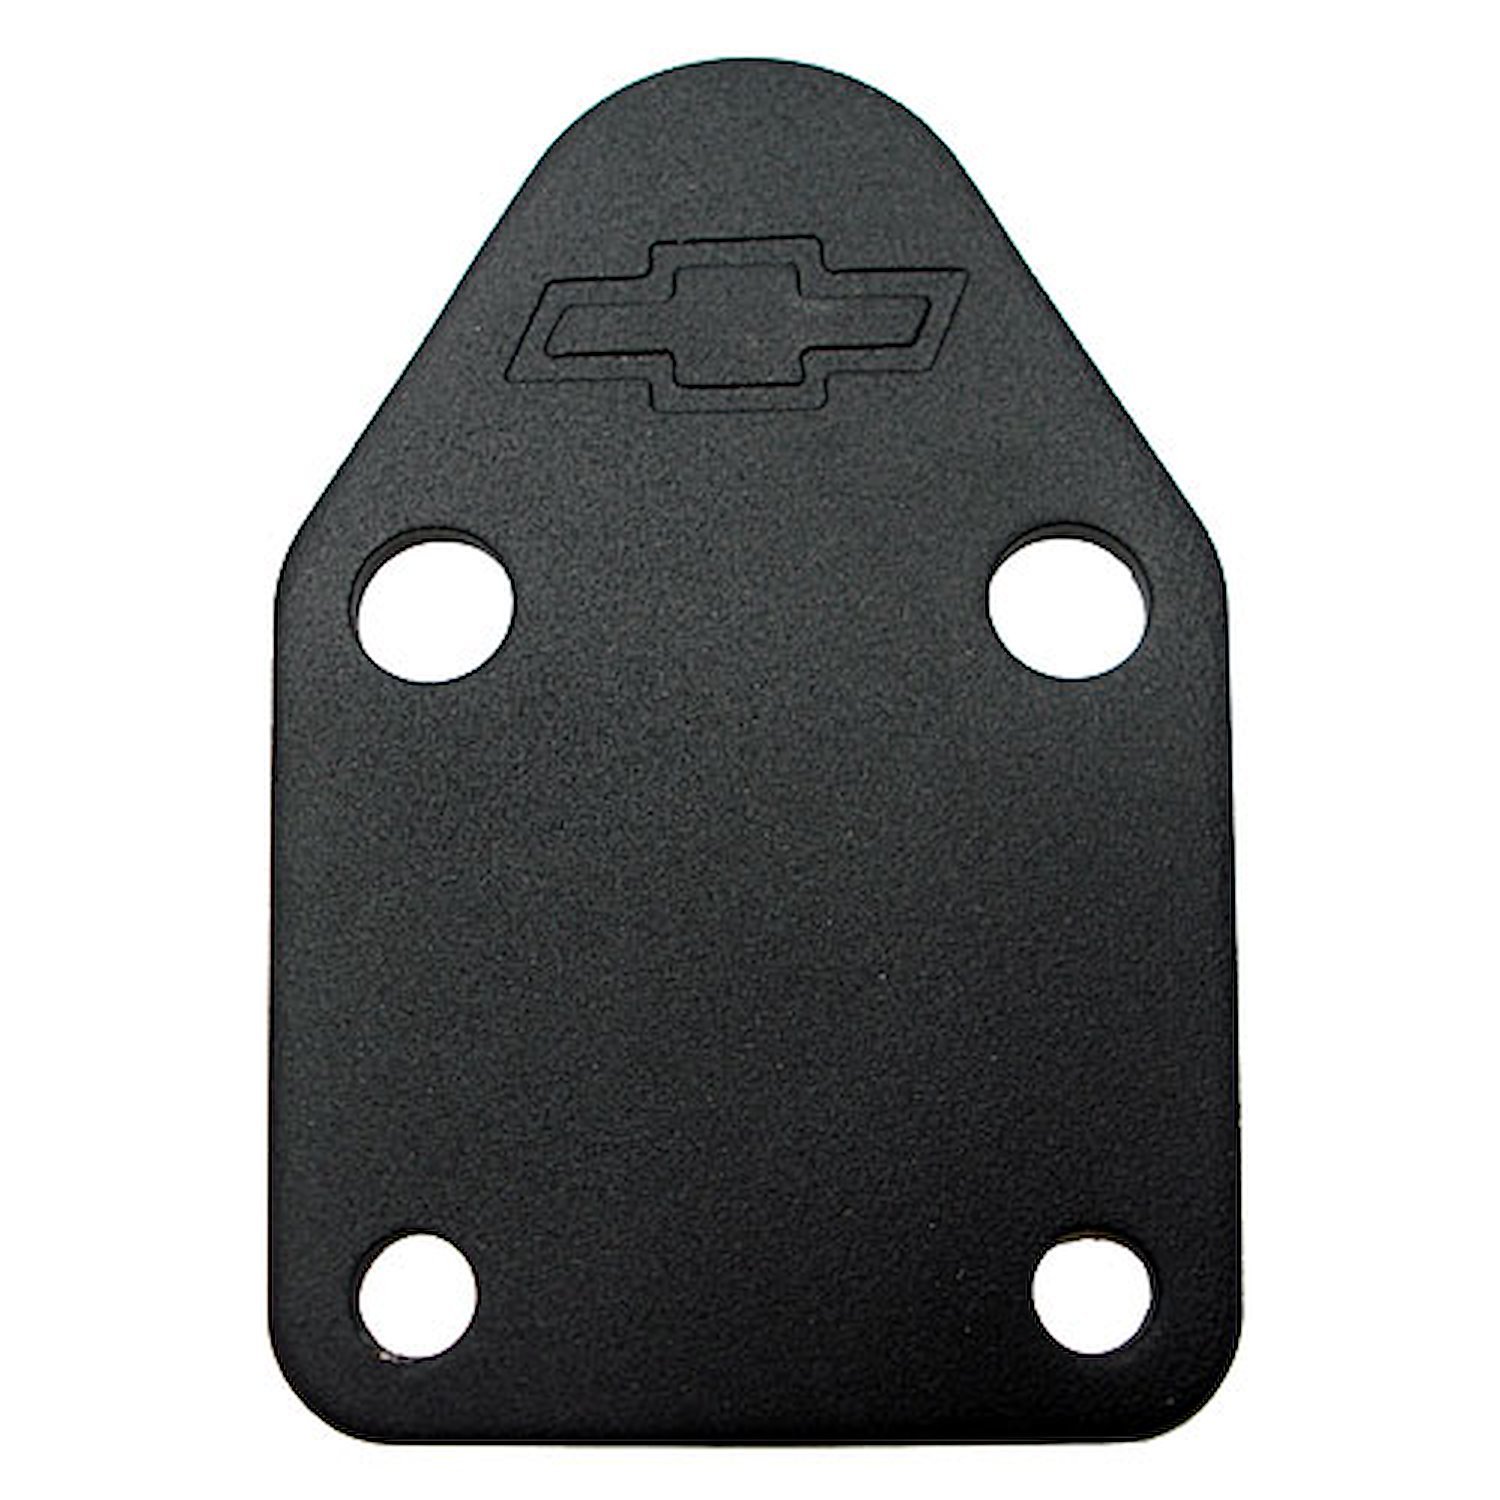 Bowtie Fuel Pump Block-Off Plate for Small Block